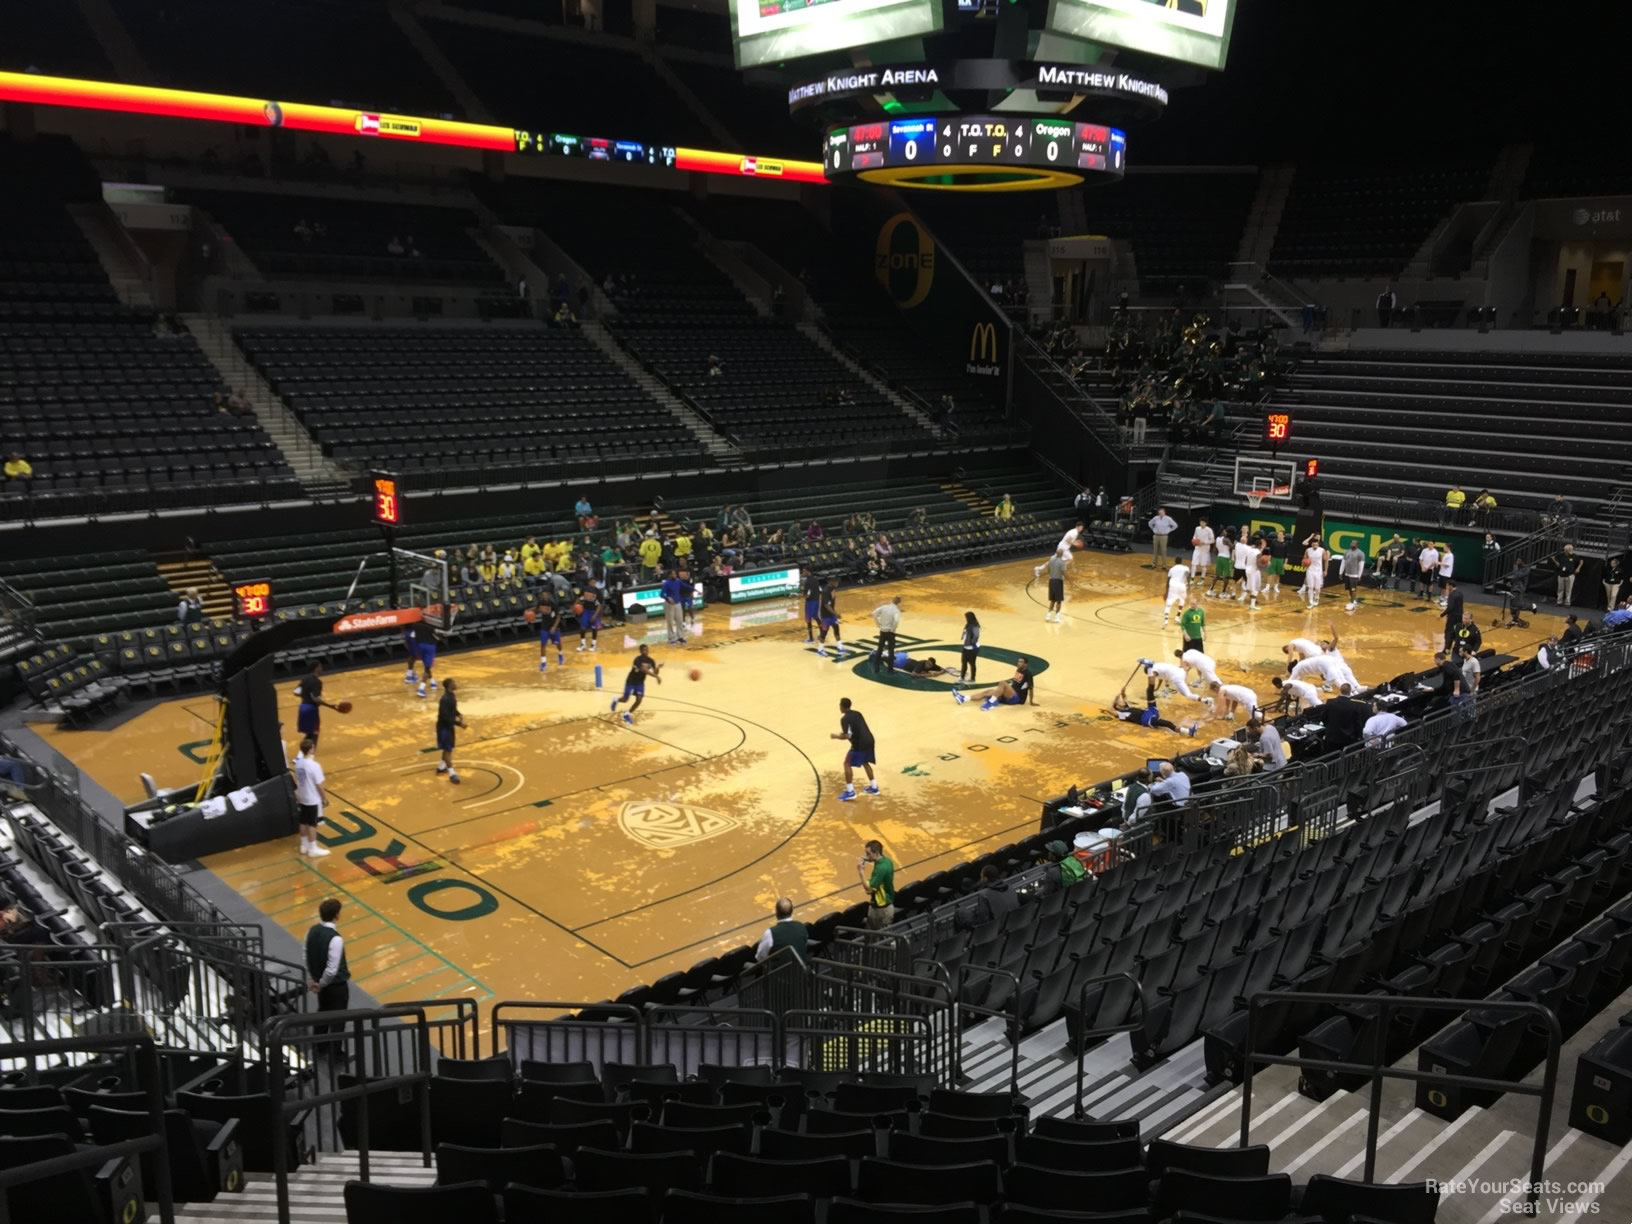 section 105, row k seat view  - matthew knight arena